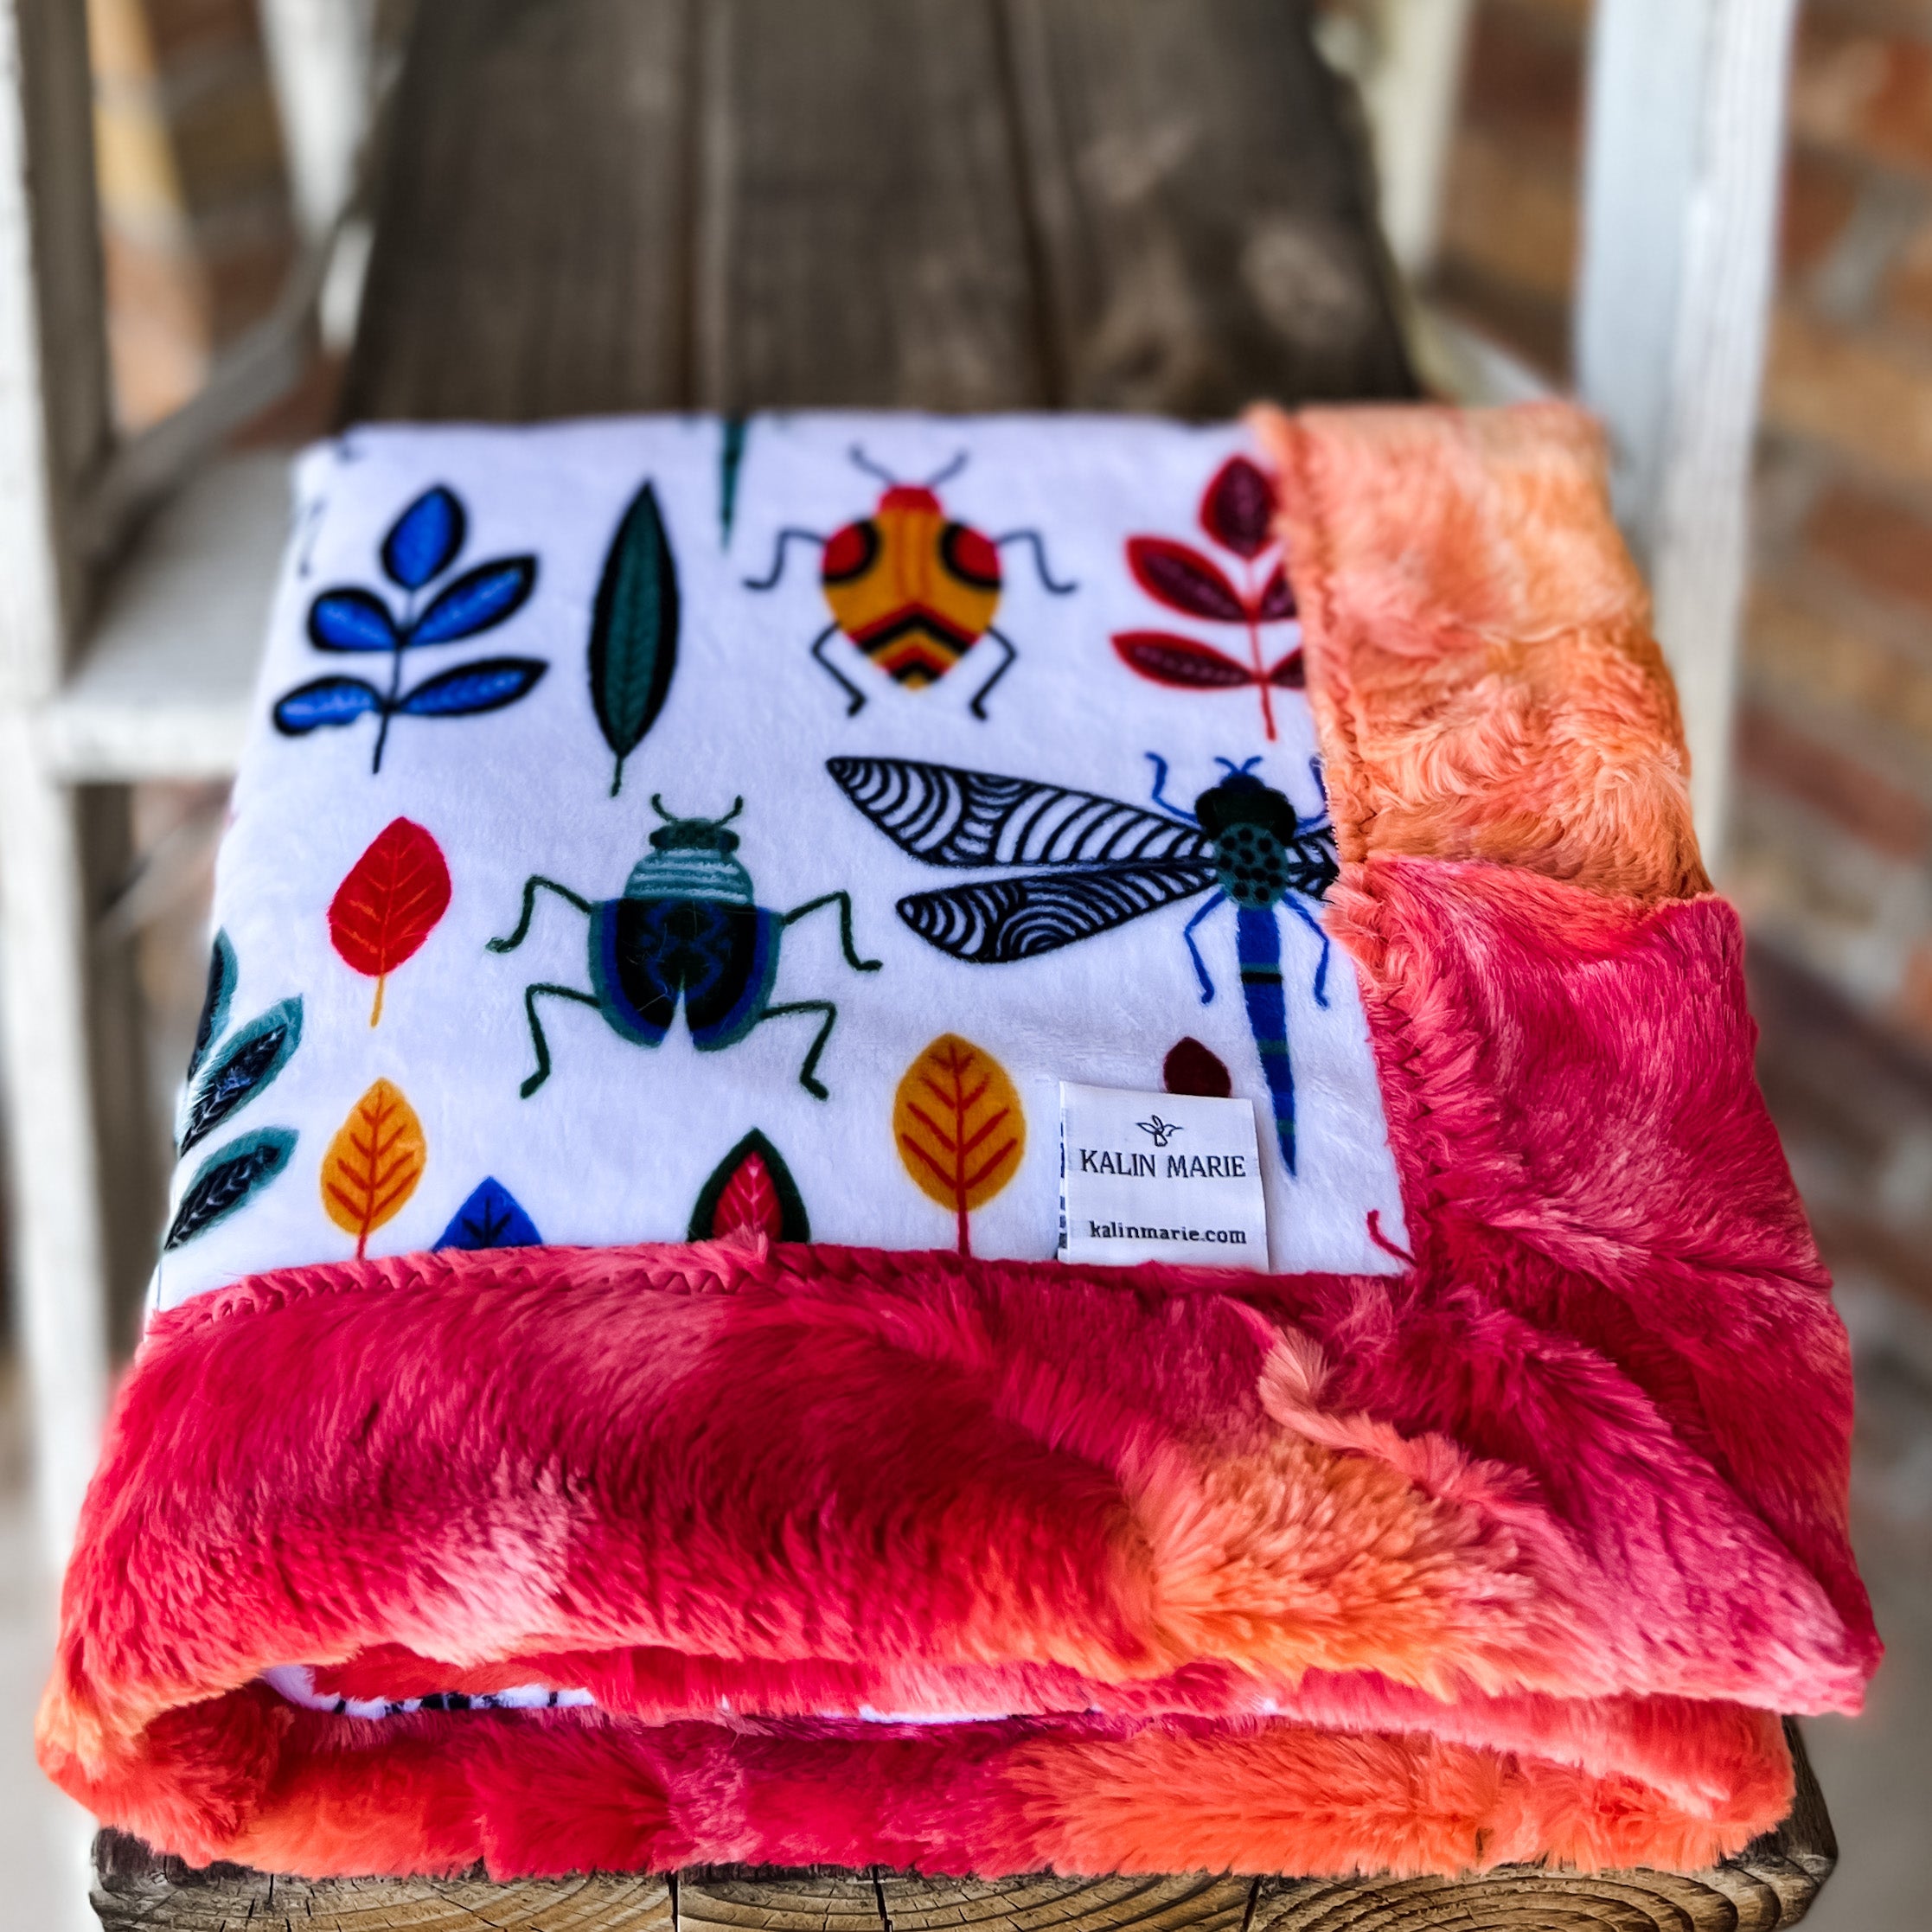 Last Chance! New Buggy Snuggle Blanket